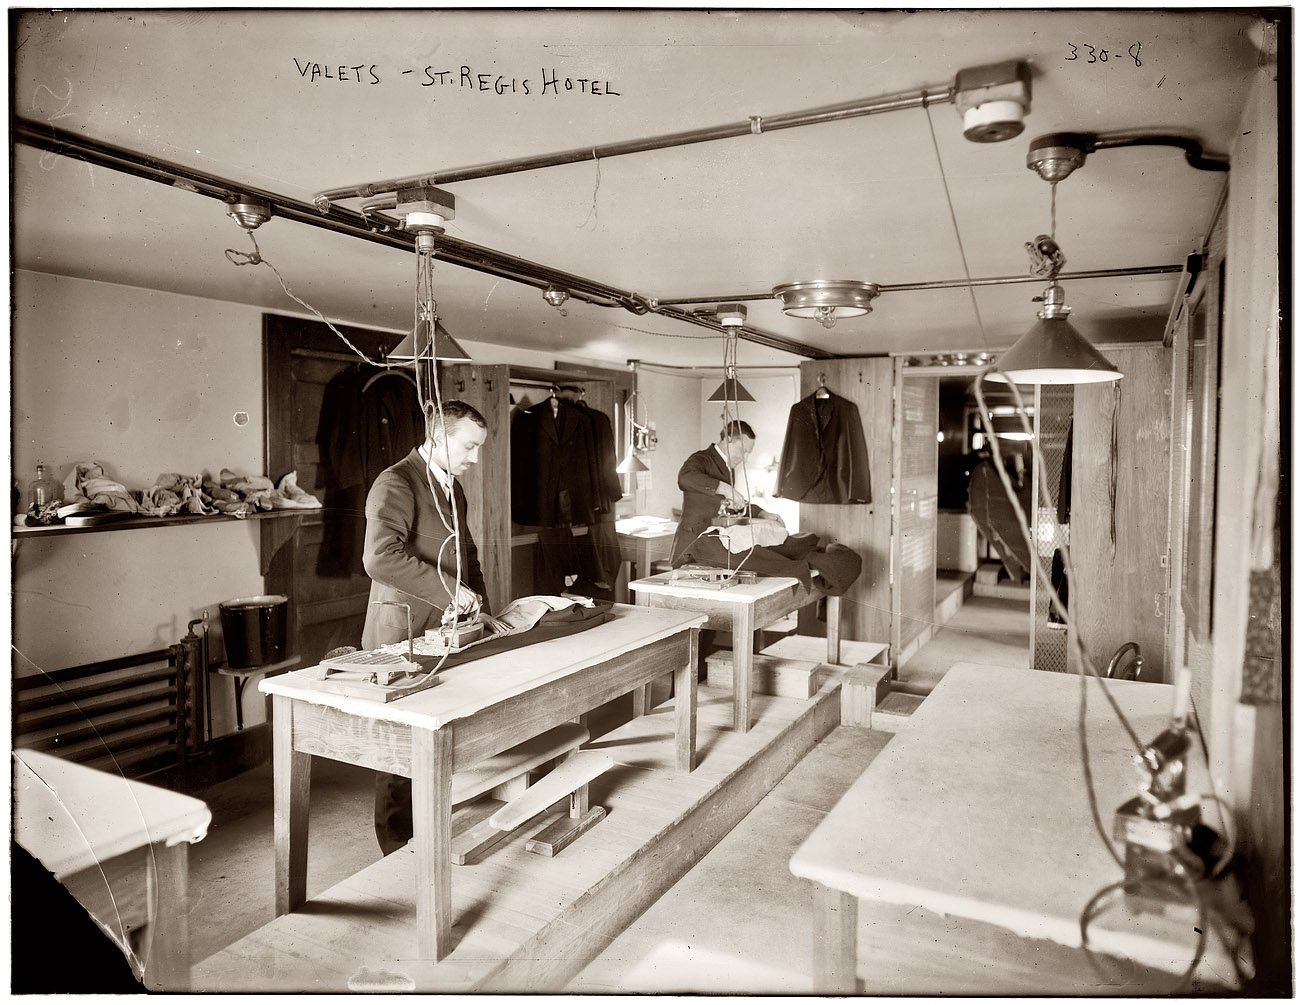 Valets pressing coats with electric irons at the St. Regis Hotel in New York circa 1910. 8x10 glass negative, George Grantham Bain Collection. View full size.